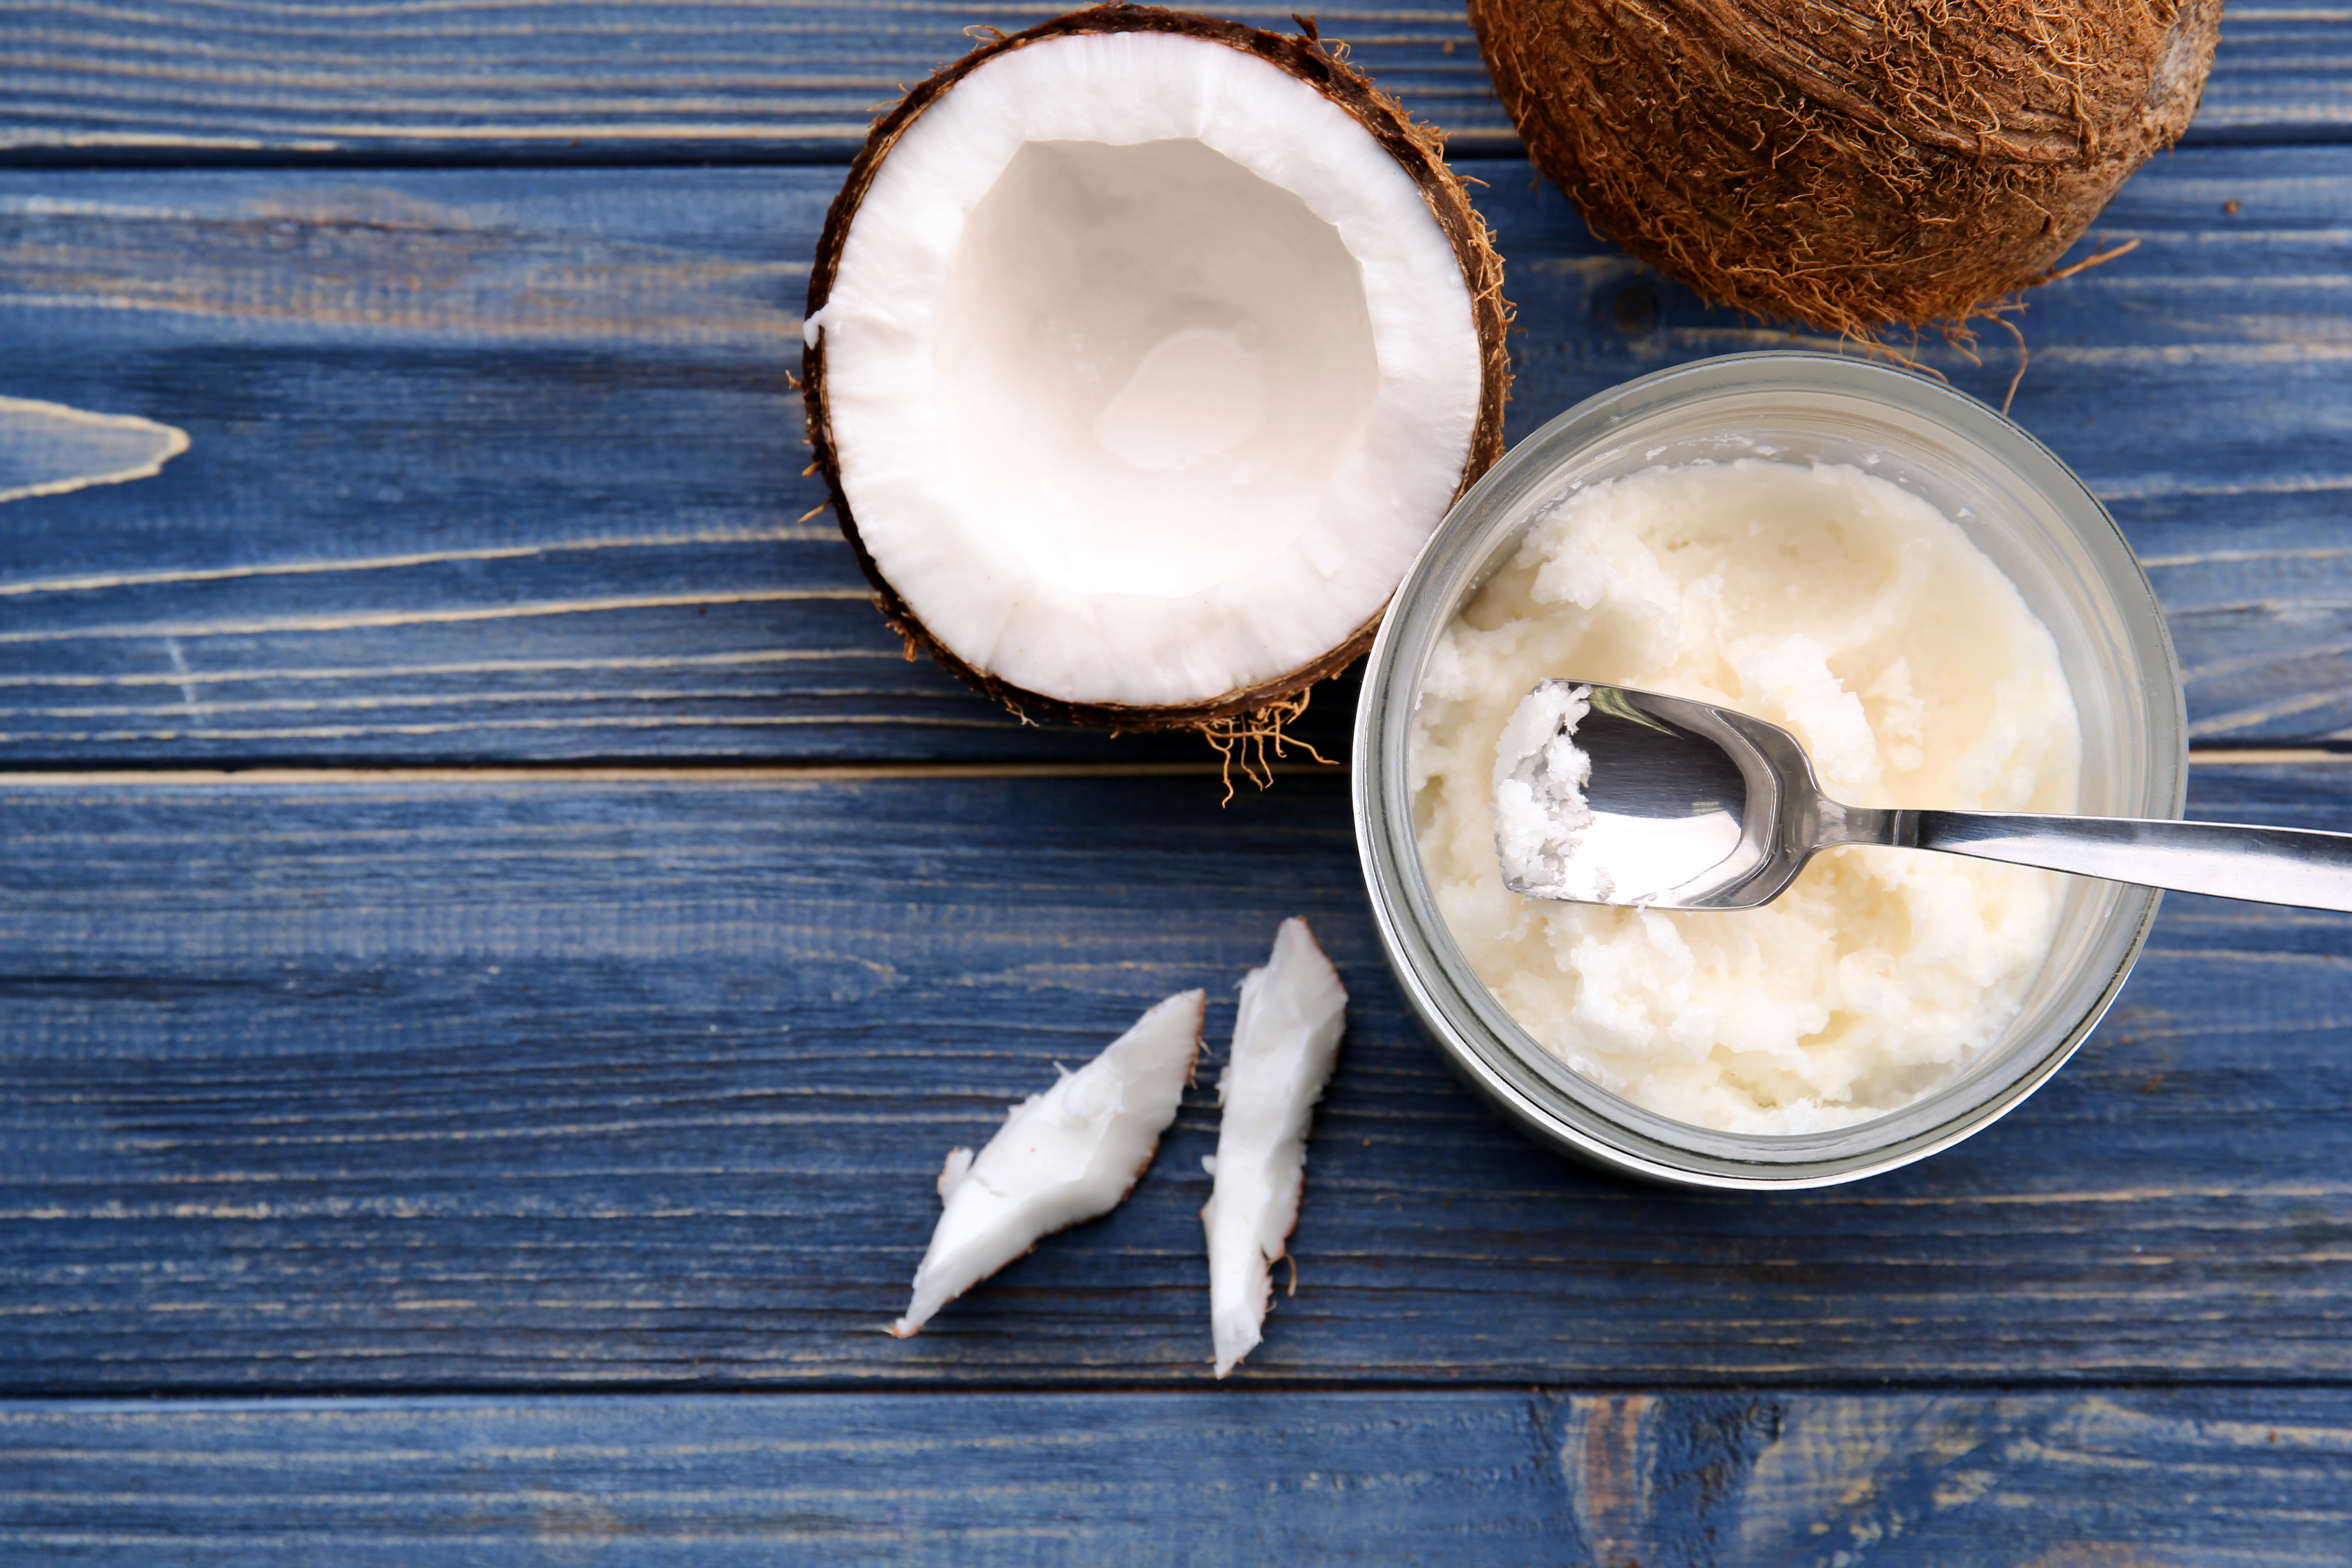 Overhead view of a half of an open coconut and jar of coconut oil with a spoon in it, both on a table top.